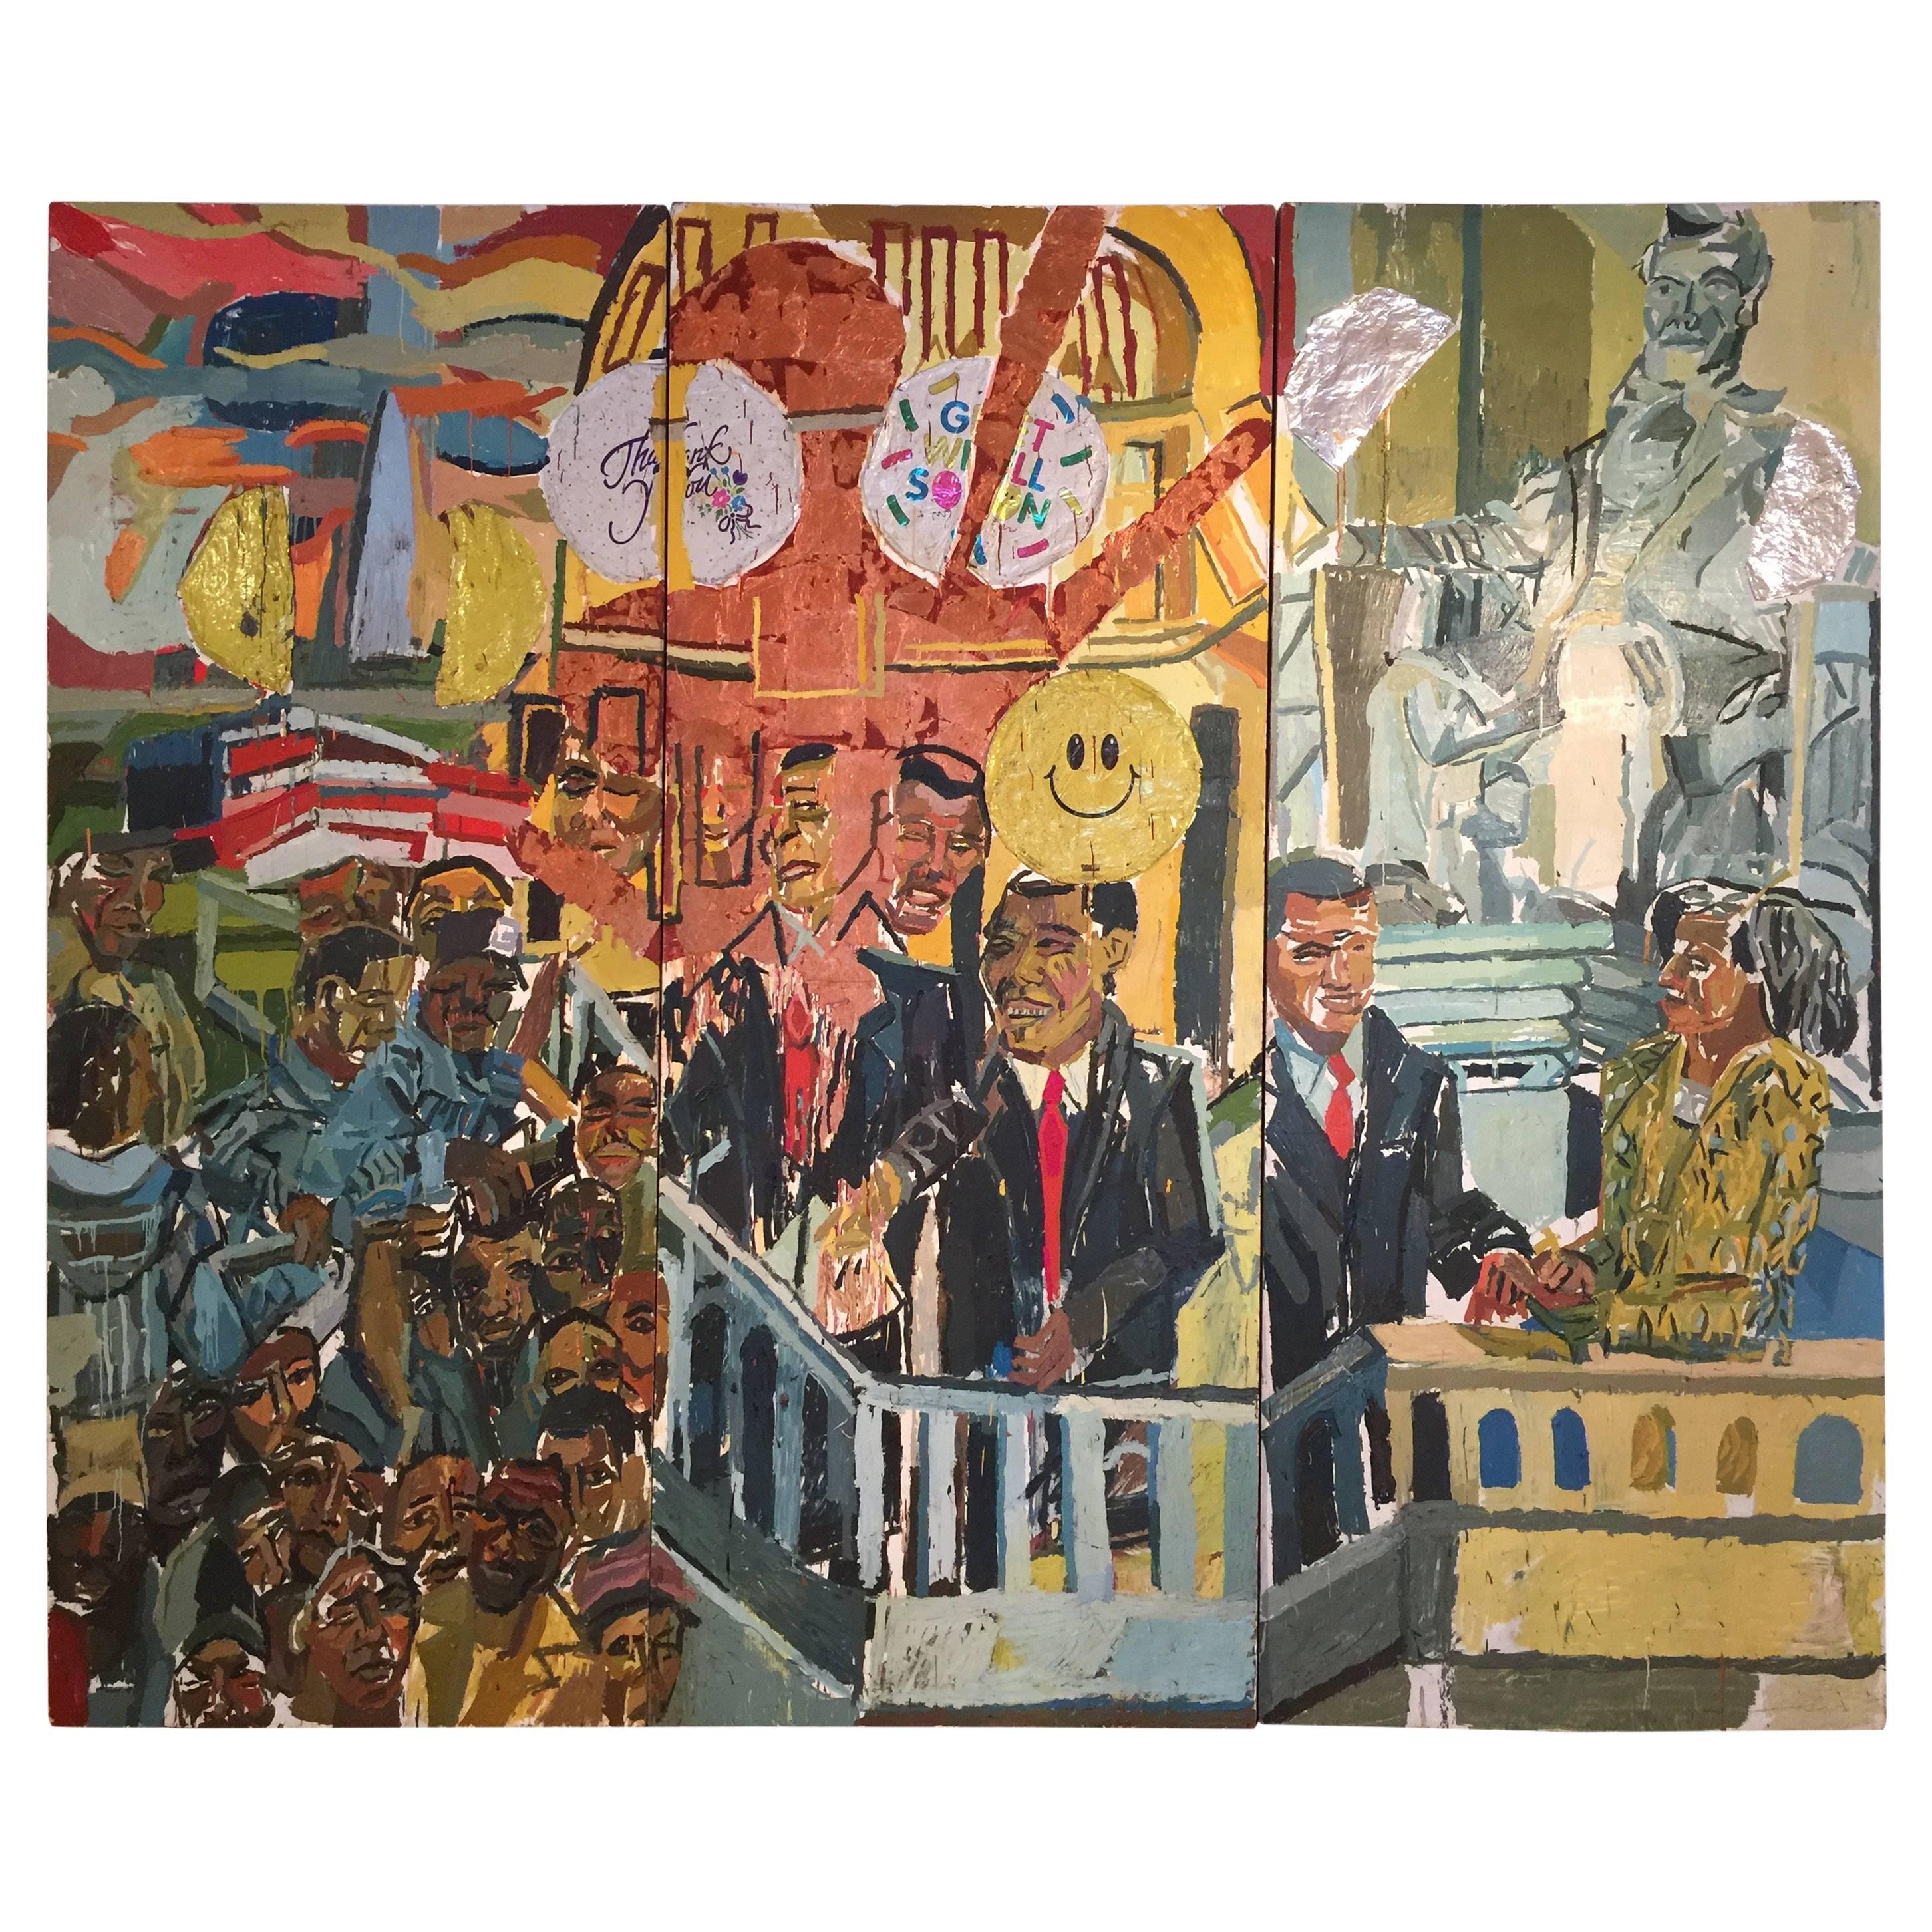 Inauguration of President Barack Obama Triptych Painting by Clintel Steed, 2008 For Sale